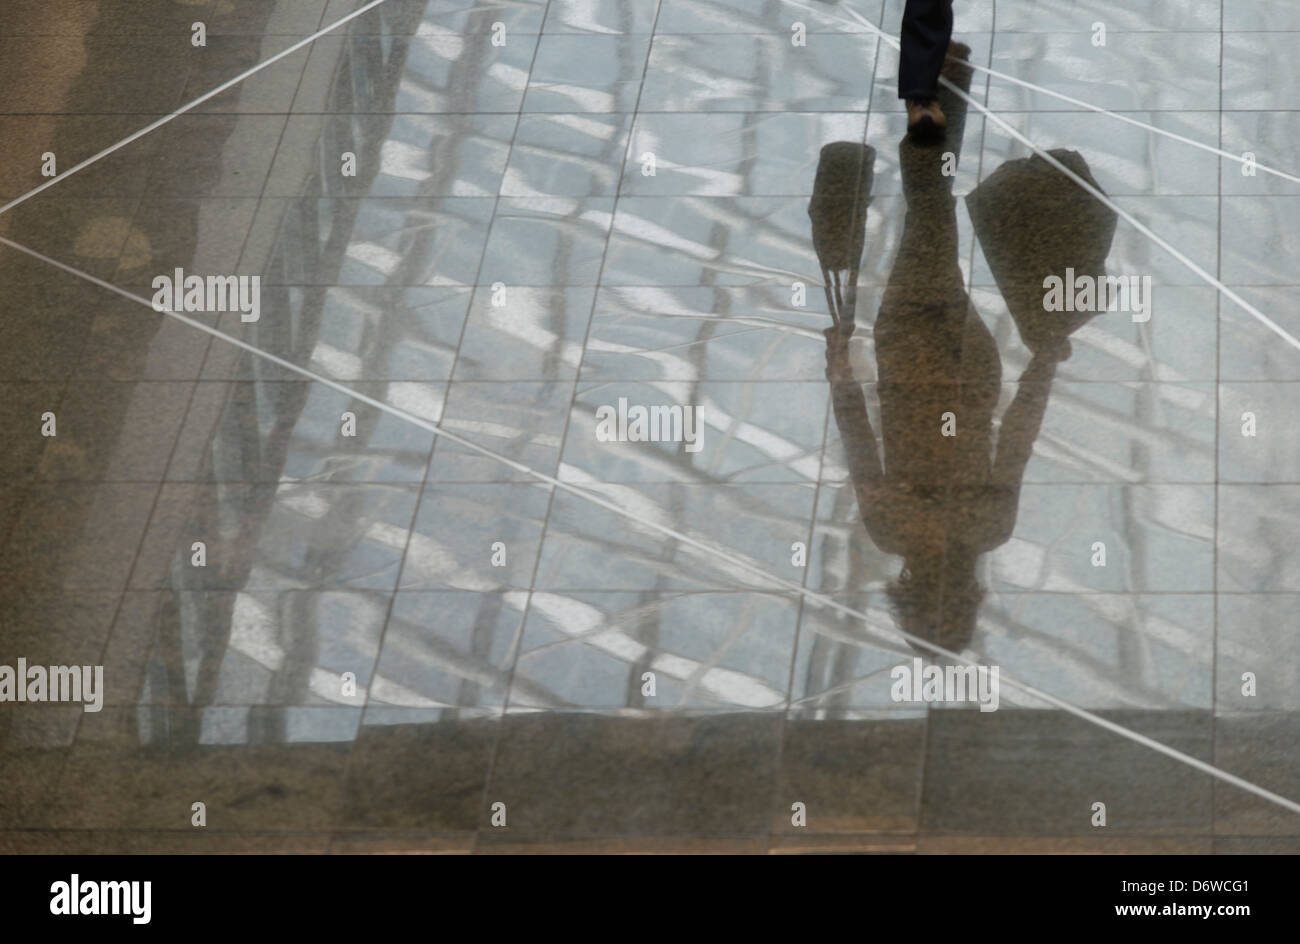 a reflection of a woman carrying shopping bags in a shopping centre Stock Photo